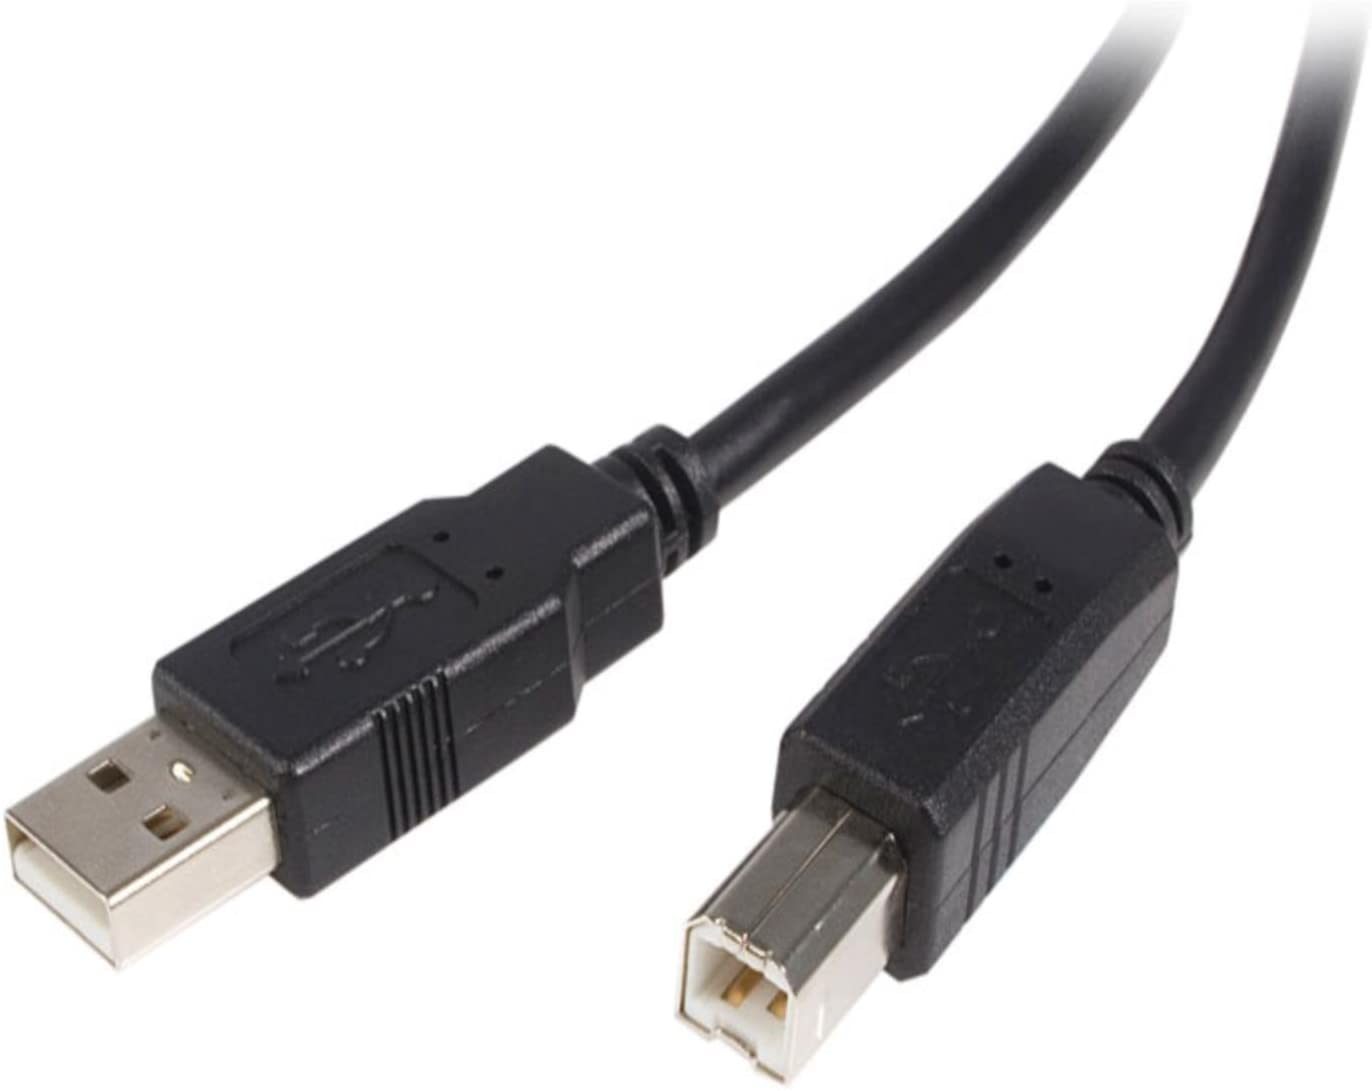  StarTech.com 2m USB 2.0 A to B Cable - 2 Meter USB best Printer Cable Cord uk reviews